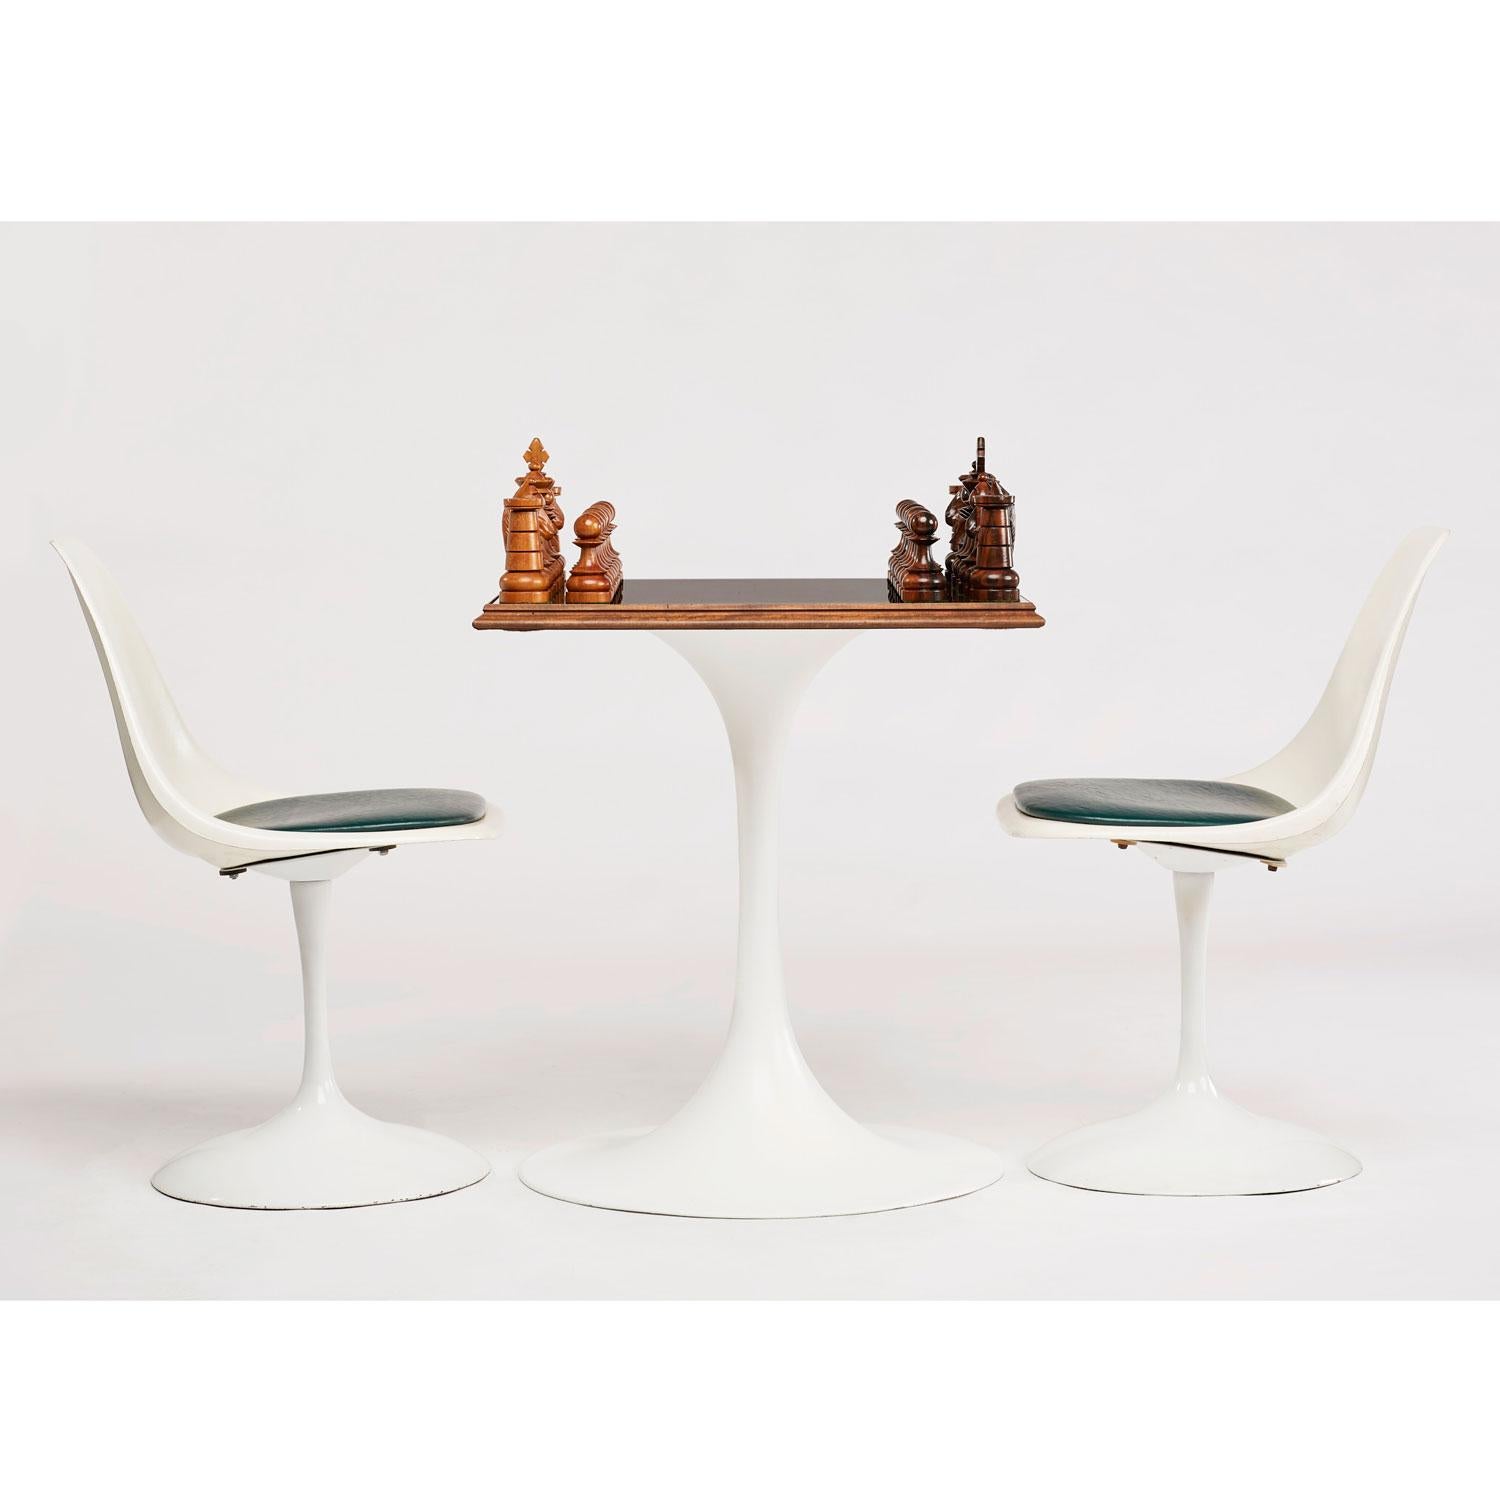 Truly one of a kind ebony wood chess set gaming table. The large chess board is mounted to a vintage, Mid-Century Modern tulip table and paired with two Saarinen style green padded chairs. Chess board has a custom cut-glass top which allows the